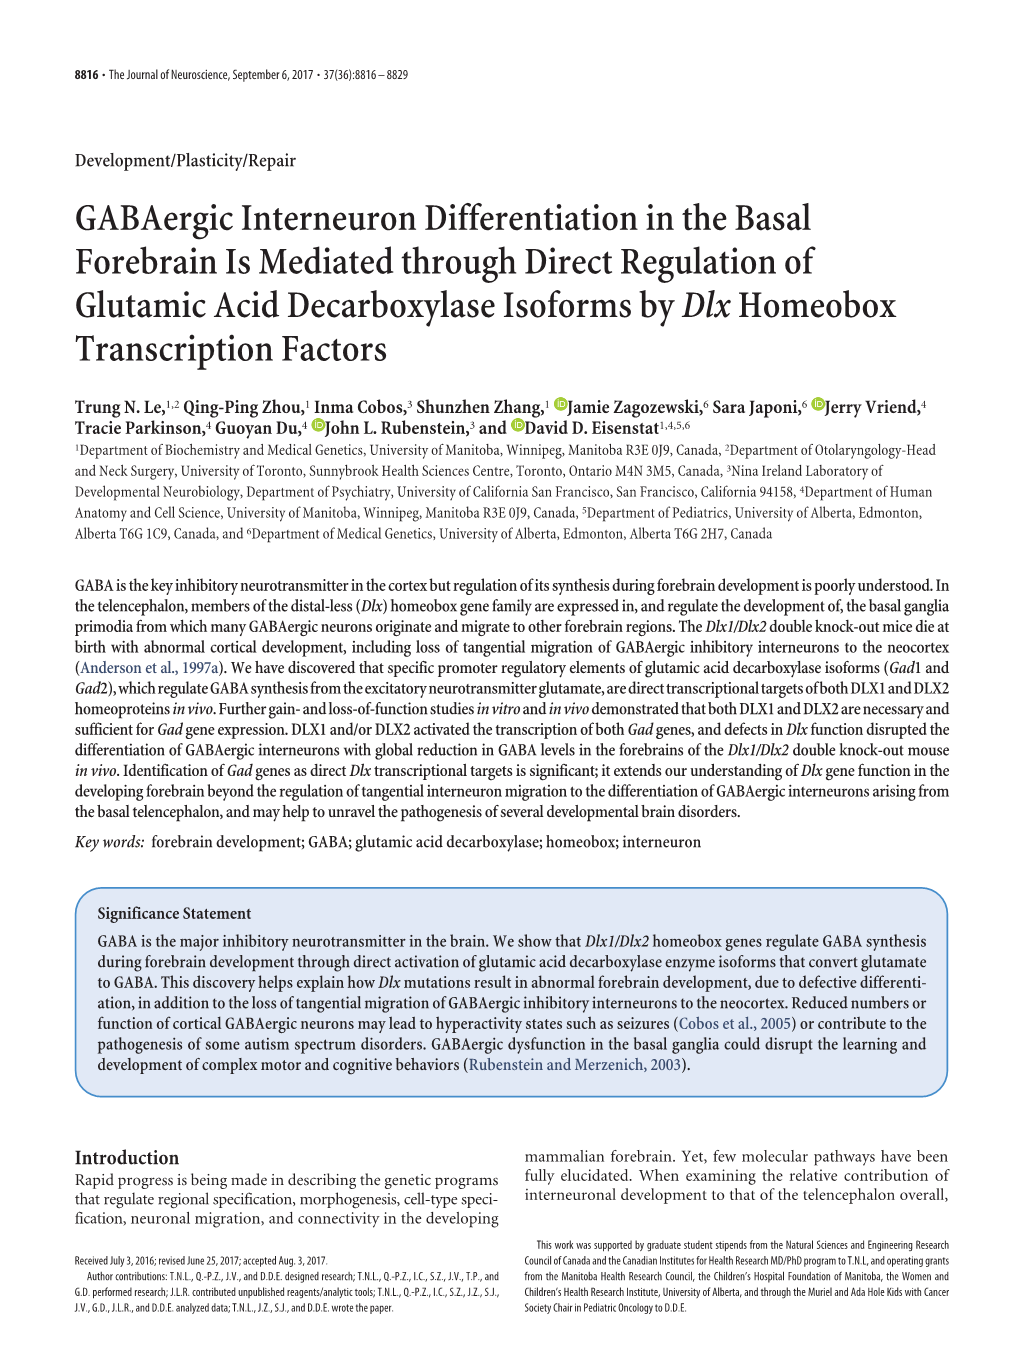 Gabaergic Interneuron Differentiation in the Basal Forebrain Is Mediated